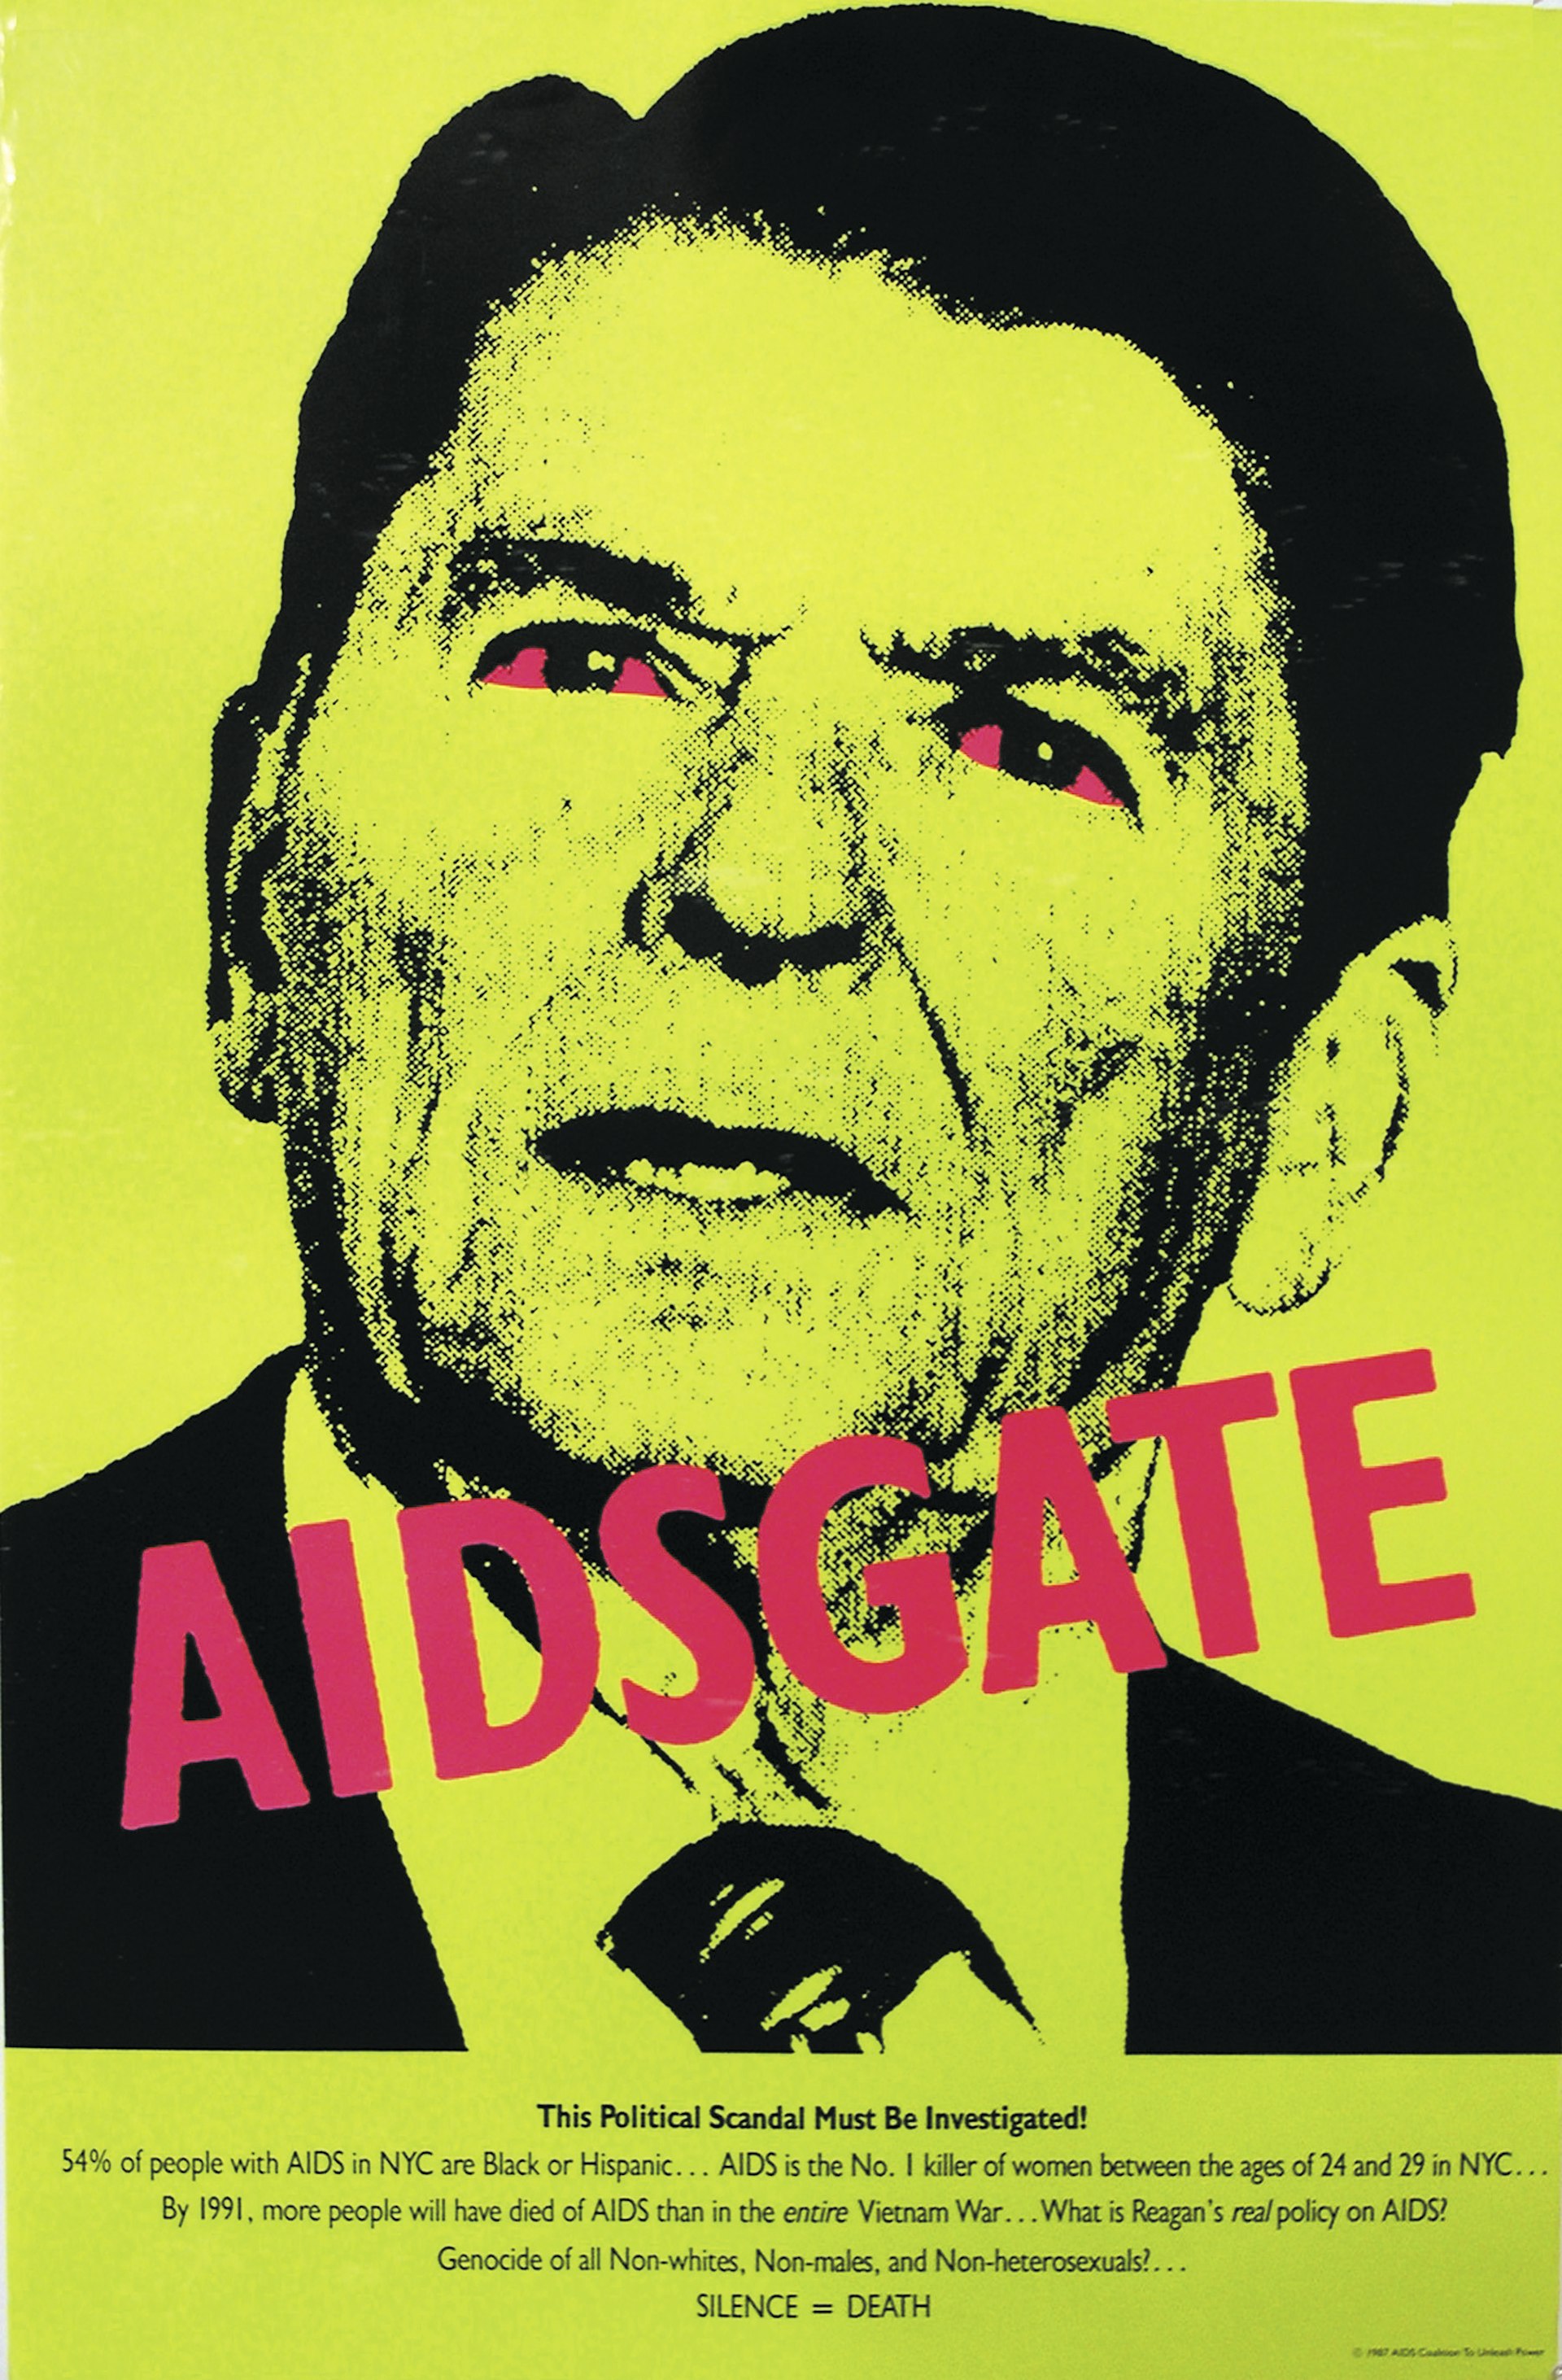 AIDSGATE,  The Silence = Death Project, 1987, poster, offset lithography